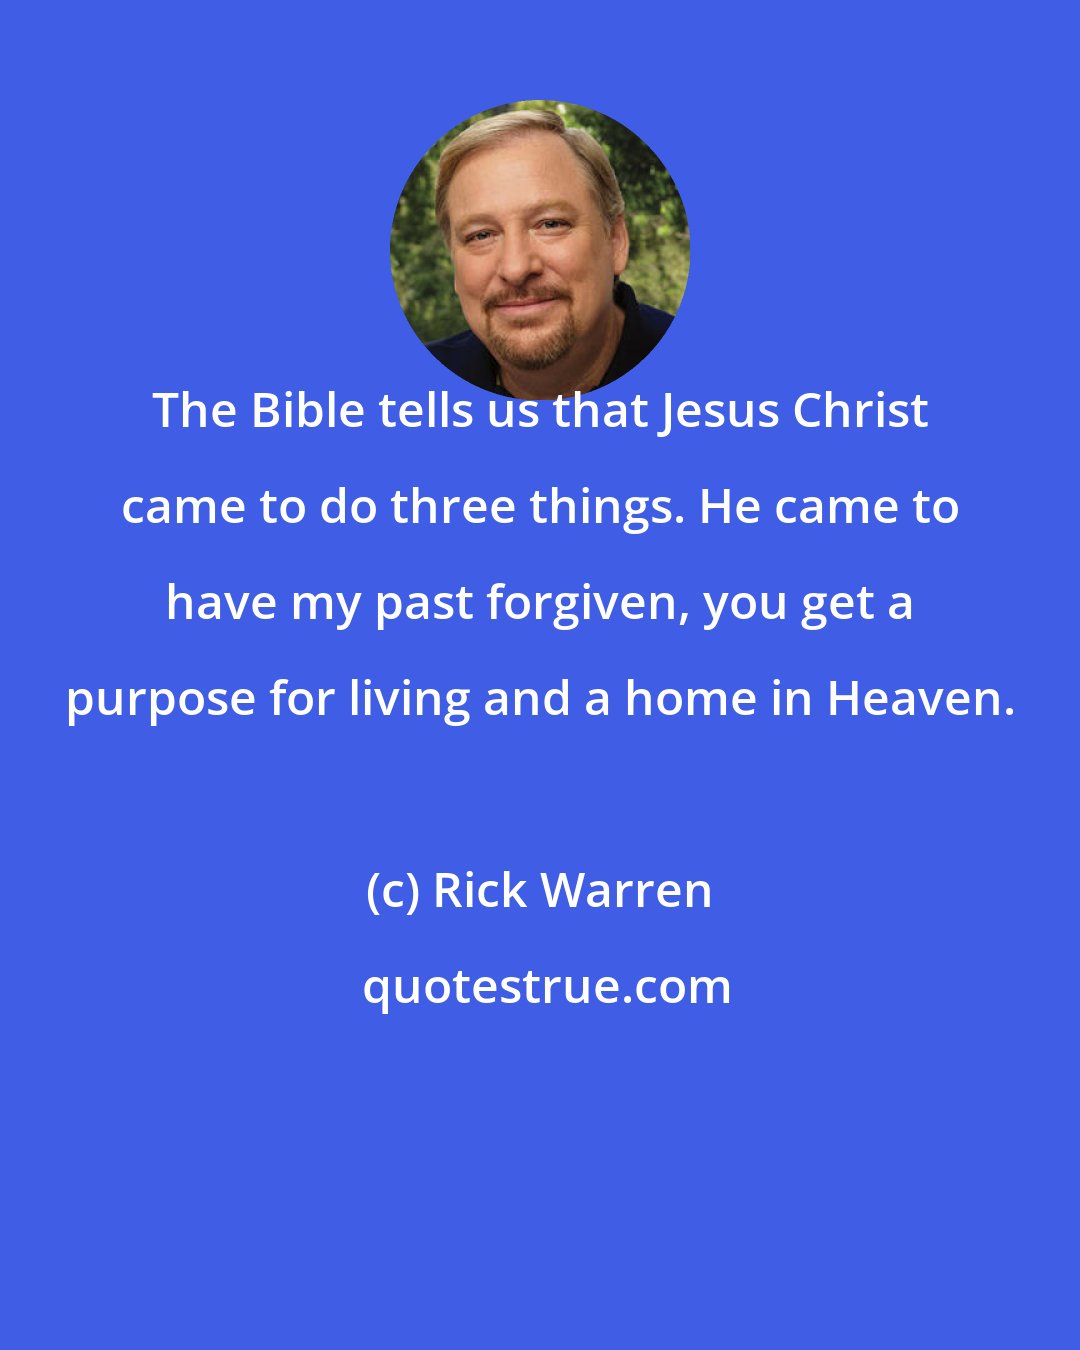 Rick Warren: The Bible tells us that Jesus Christ came to do three things. He came to have my past forgiven, you get a purpose for living and a home in Heaven.